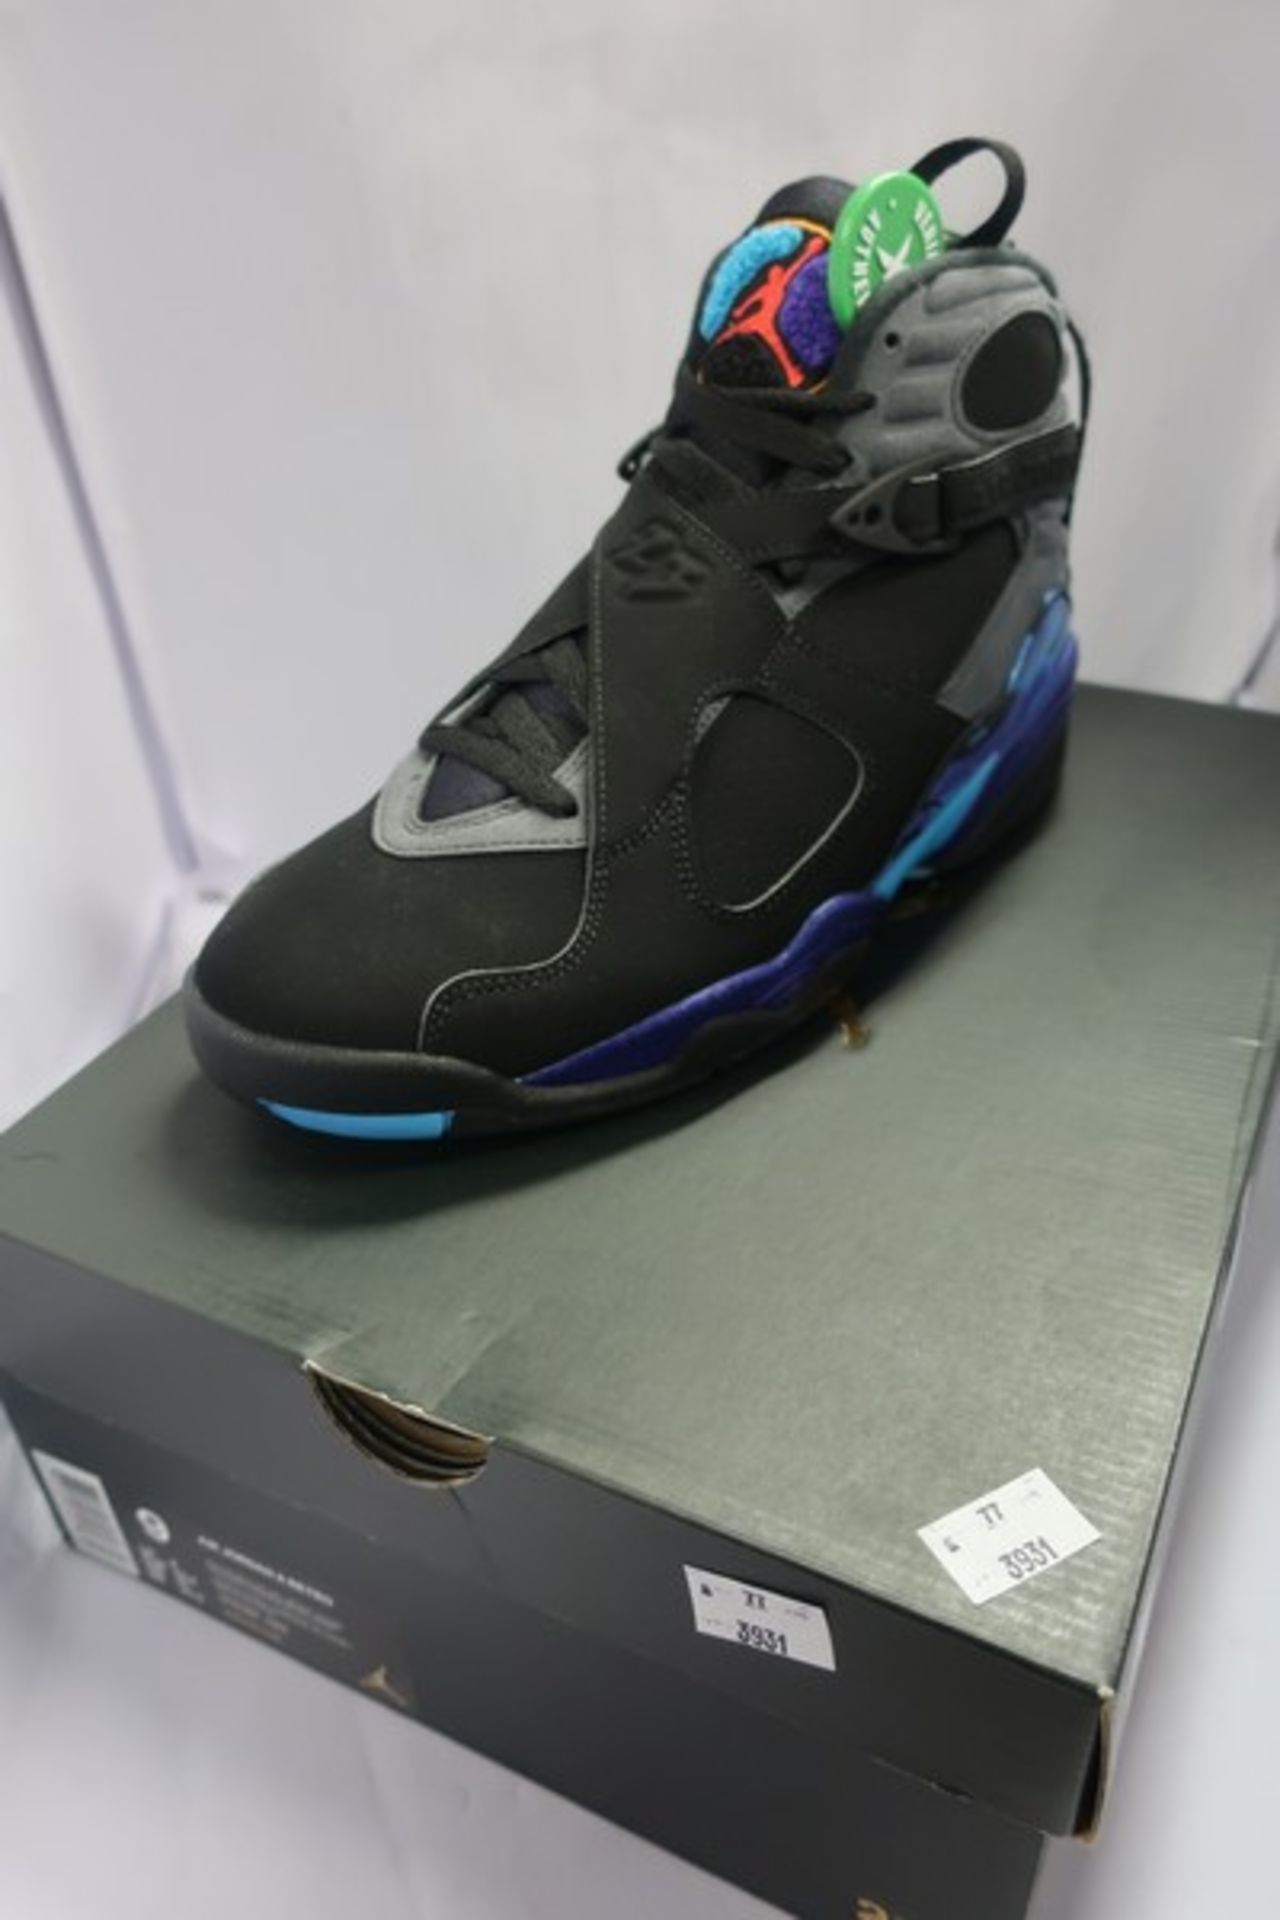 A pair of as new Nike Air Jordan 8 Retro trainers (UK 8) from Stock X.